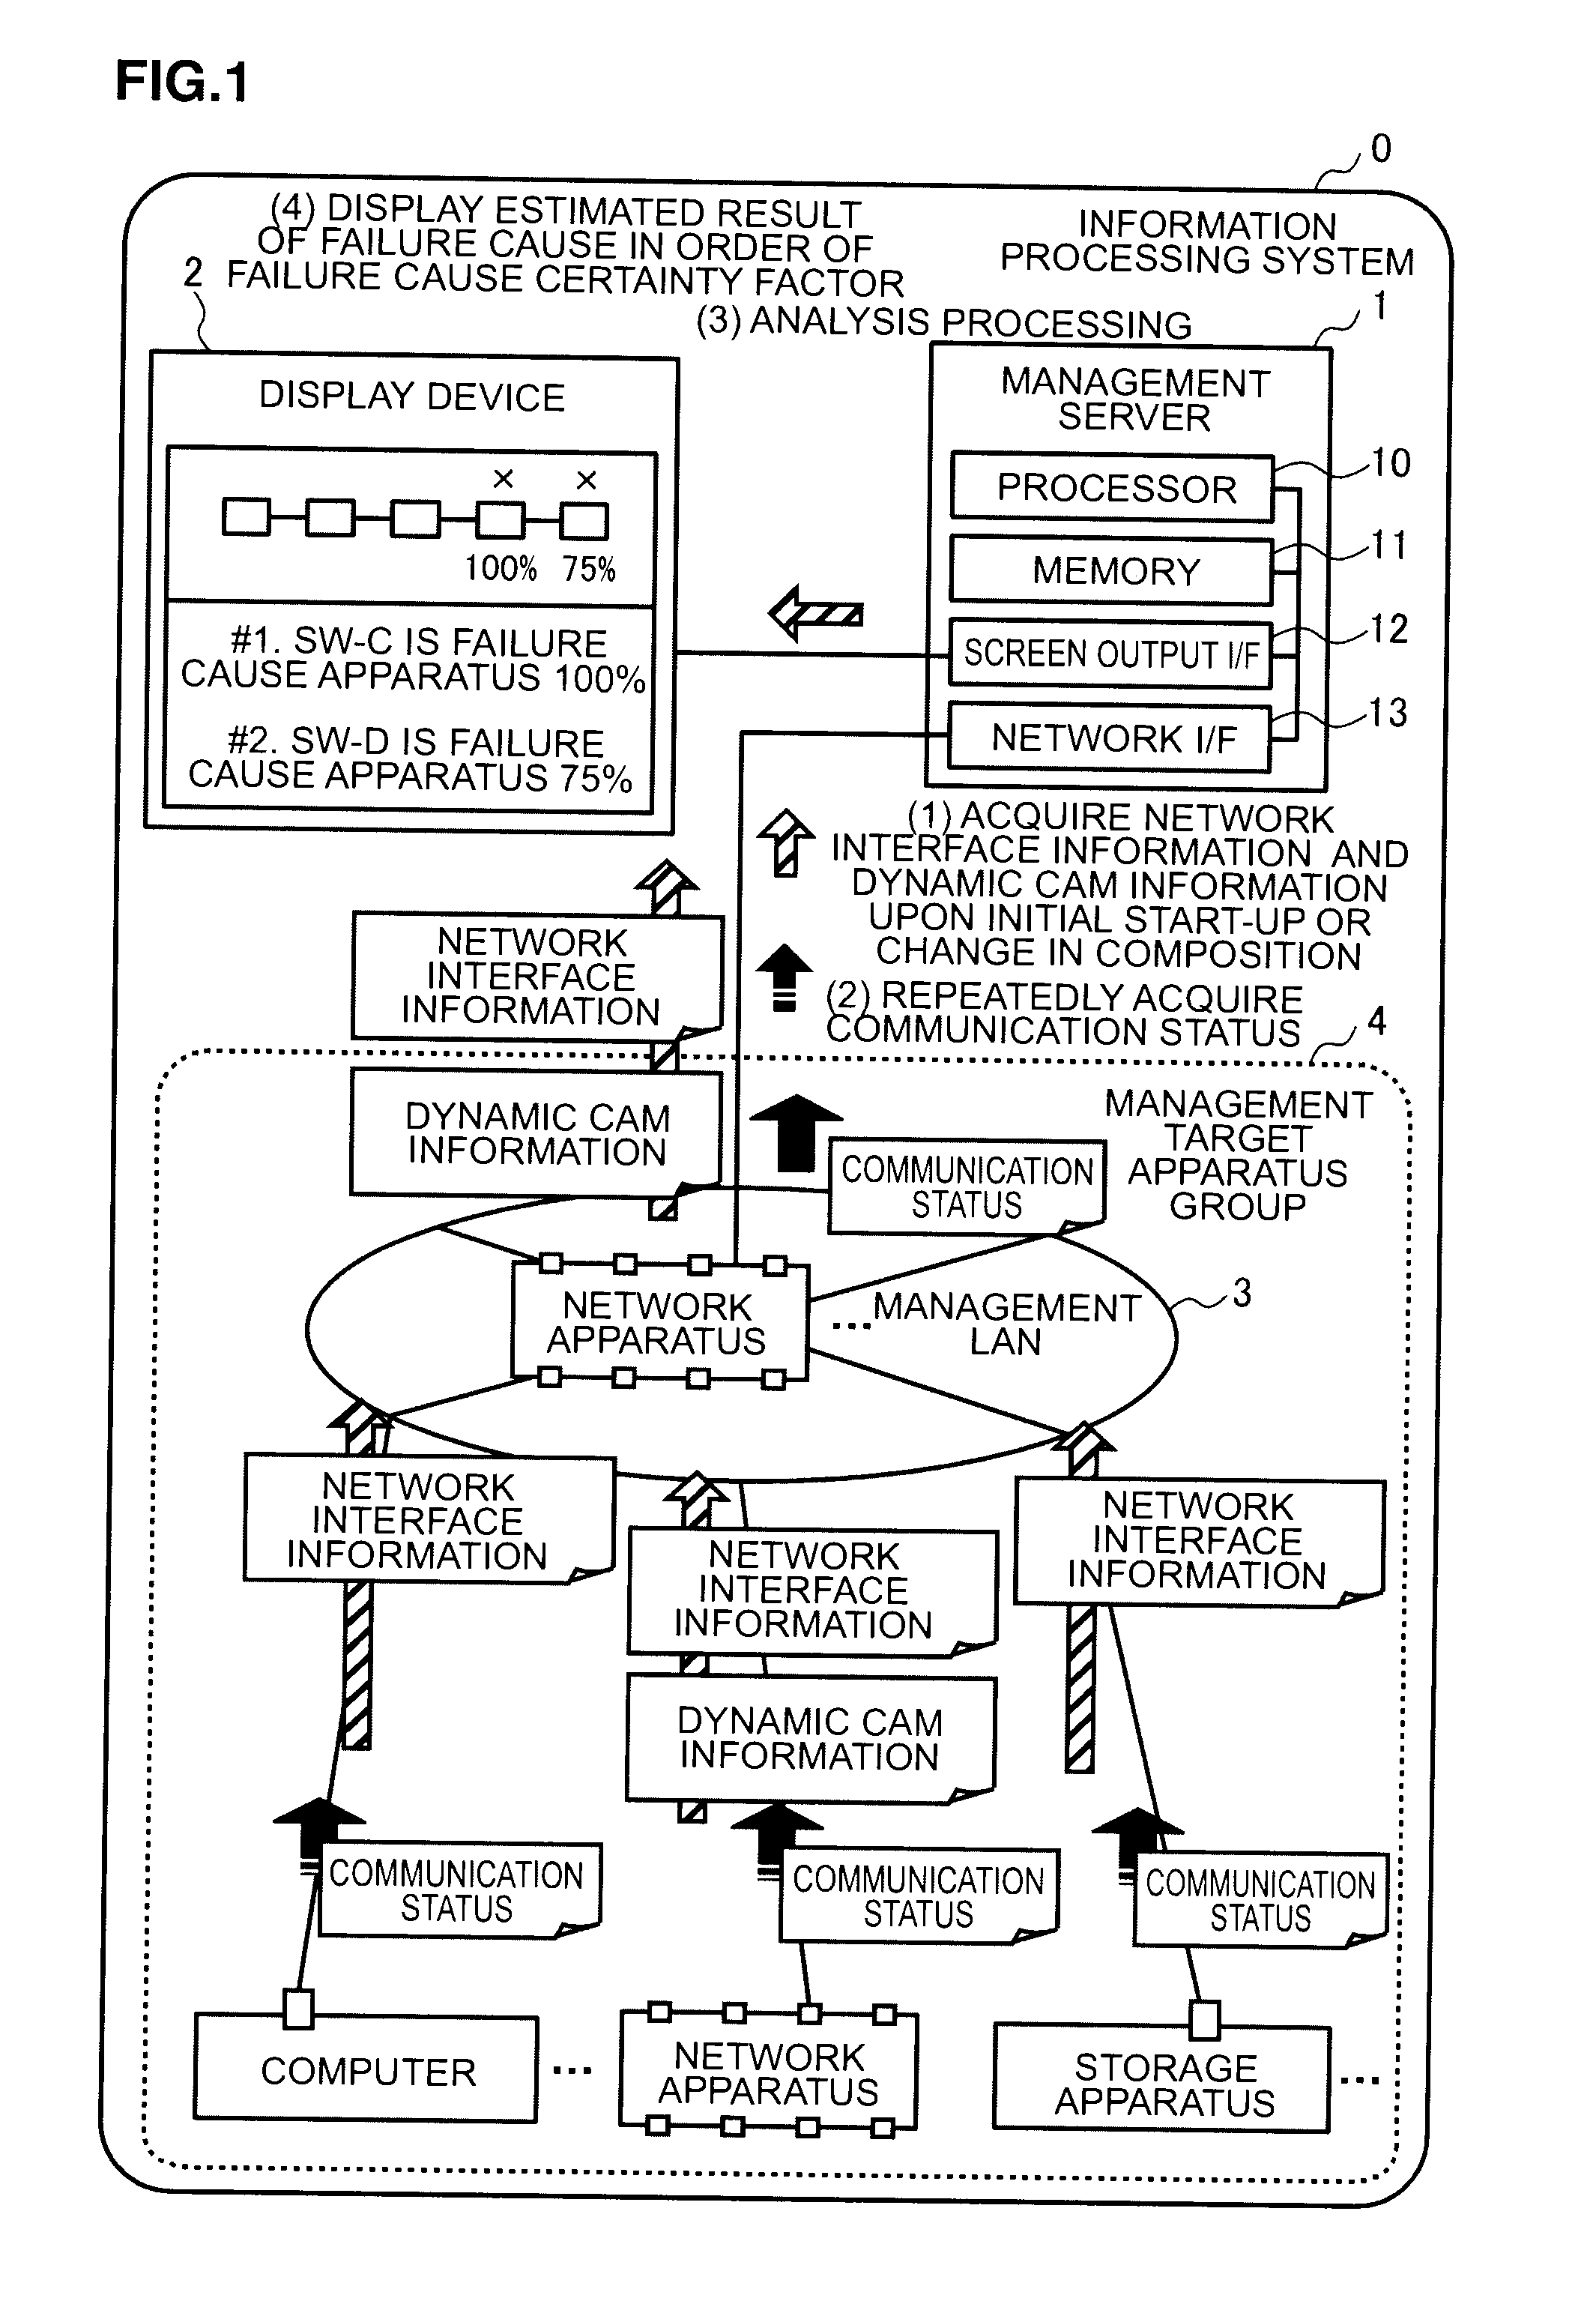 Management system and information processing system